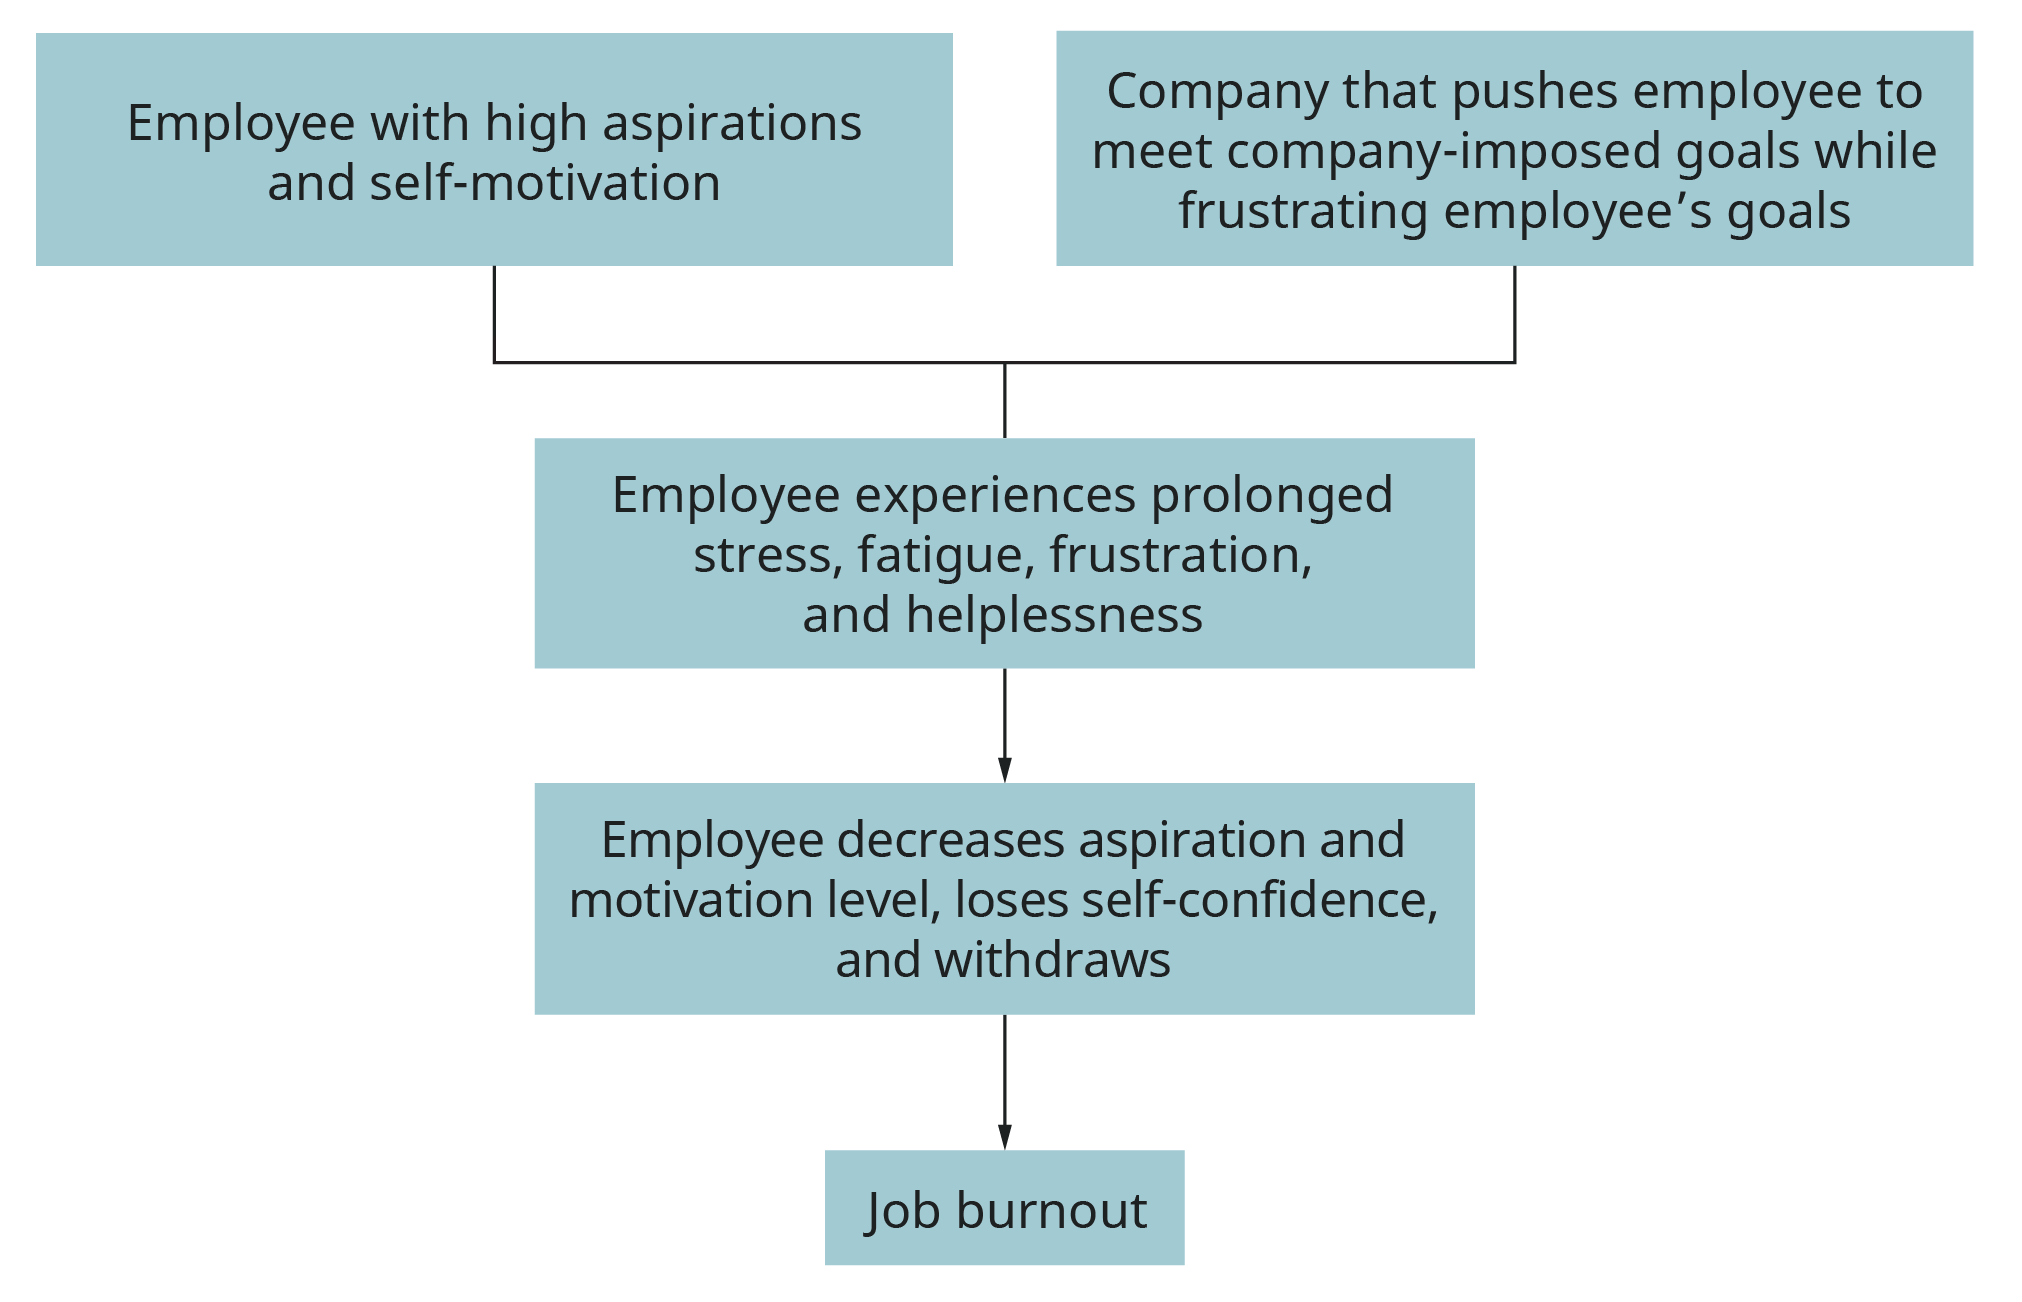 An illustration depicts the influences leading to job burnout